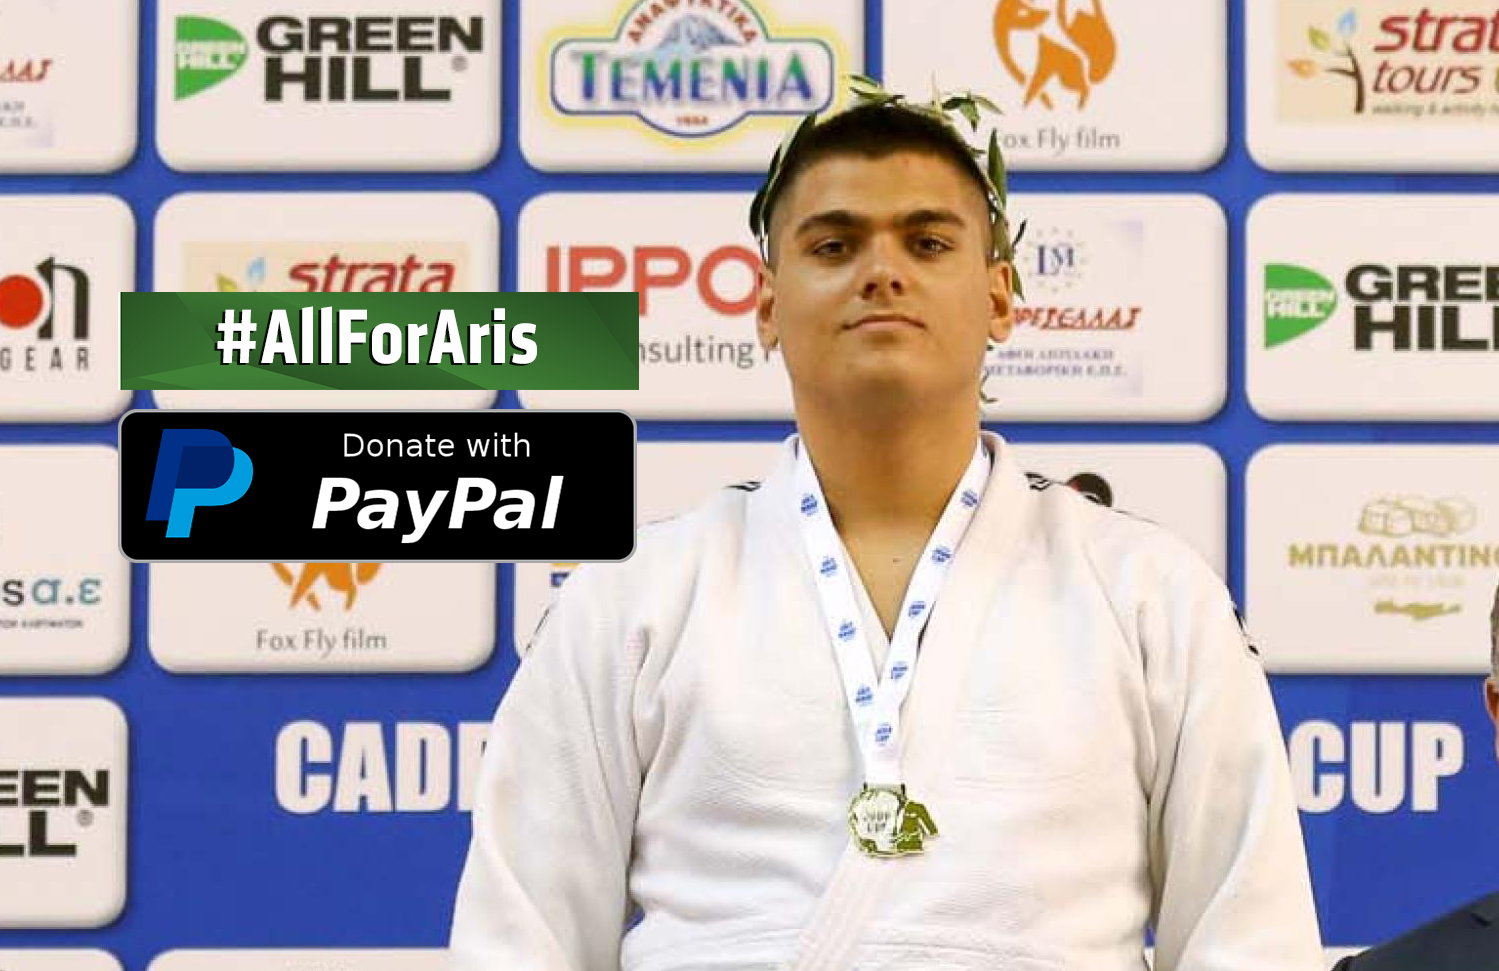 ALL FOR ARIS: JUDOKA FOR JUDOKA IN LIFE CHANGING APPEAL